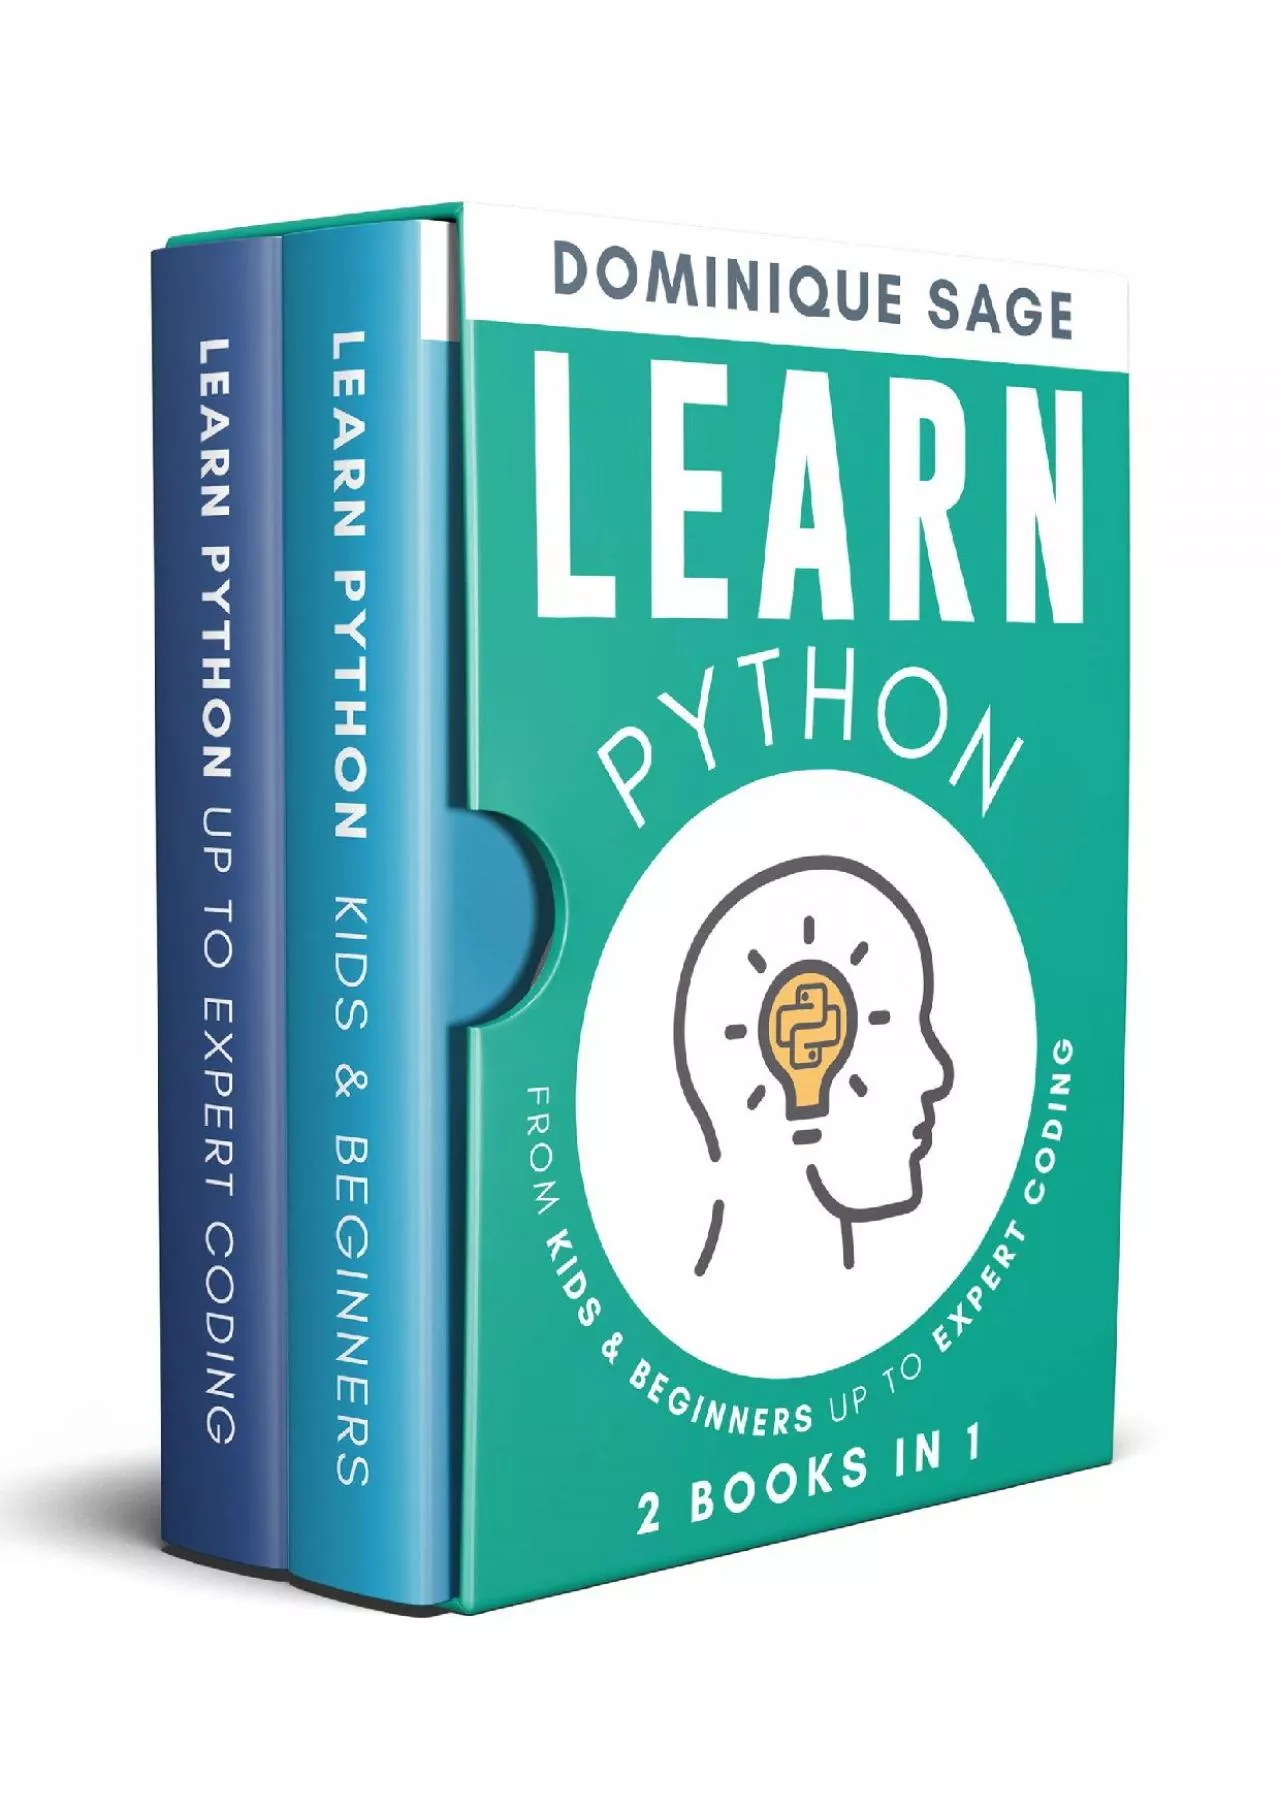 [DOWLOAD]-LEARN Python: From Kids  Beginners Up to Expert Coding - 2 Books in 1 - (Learn